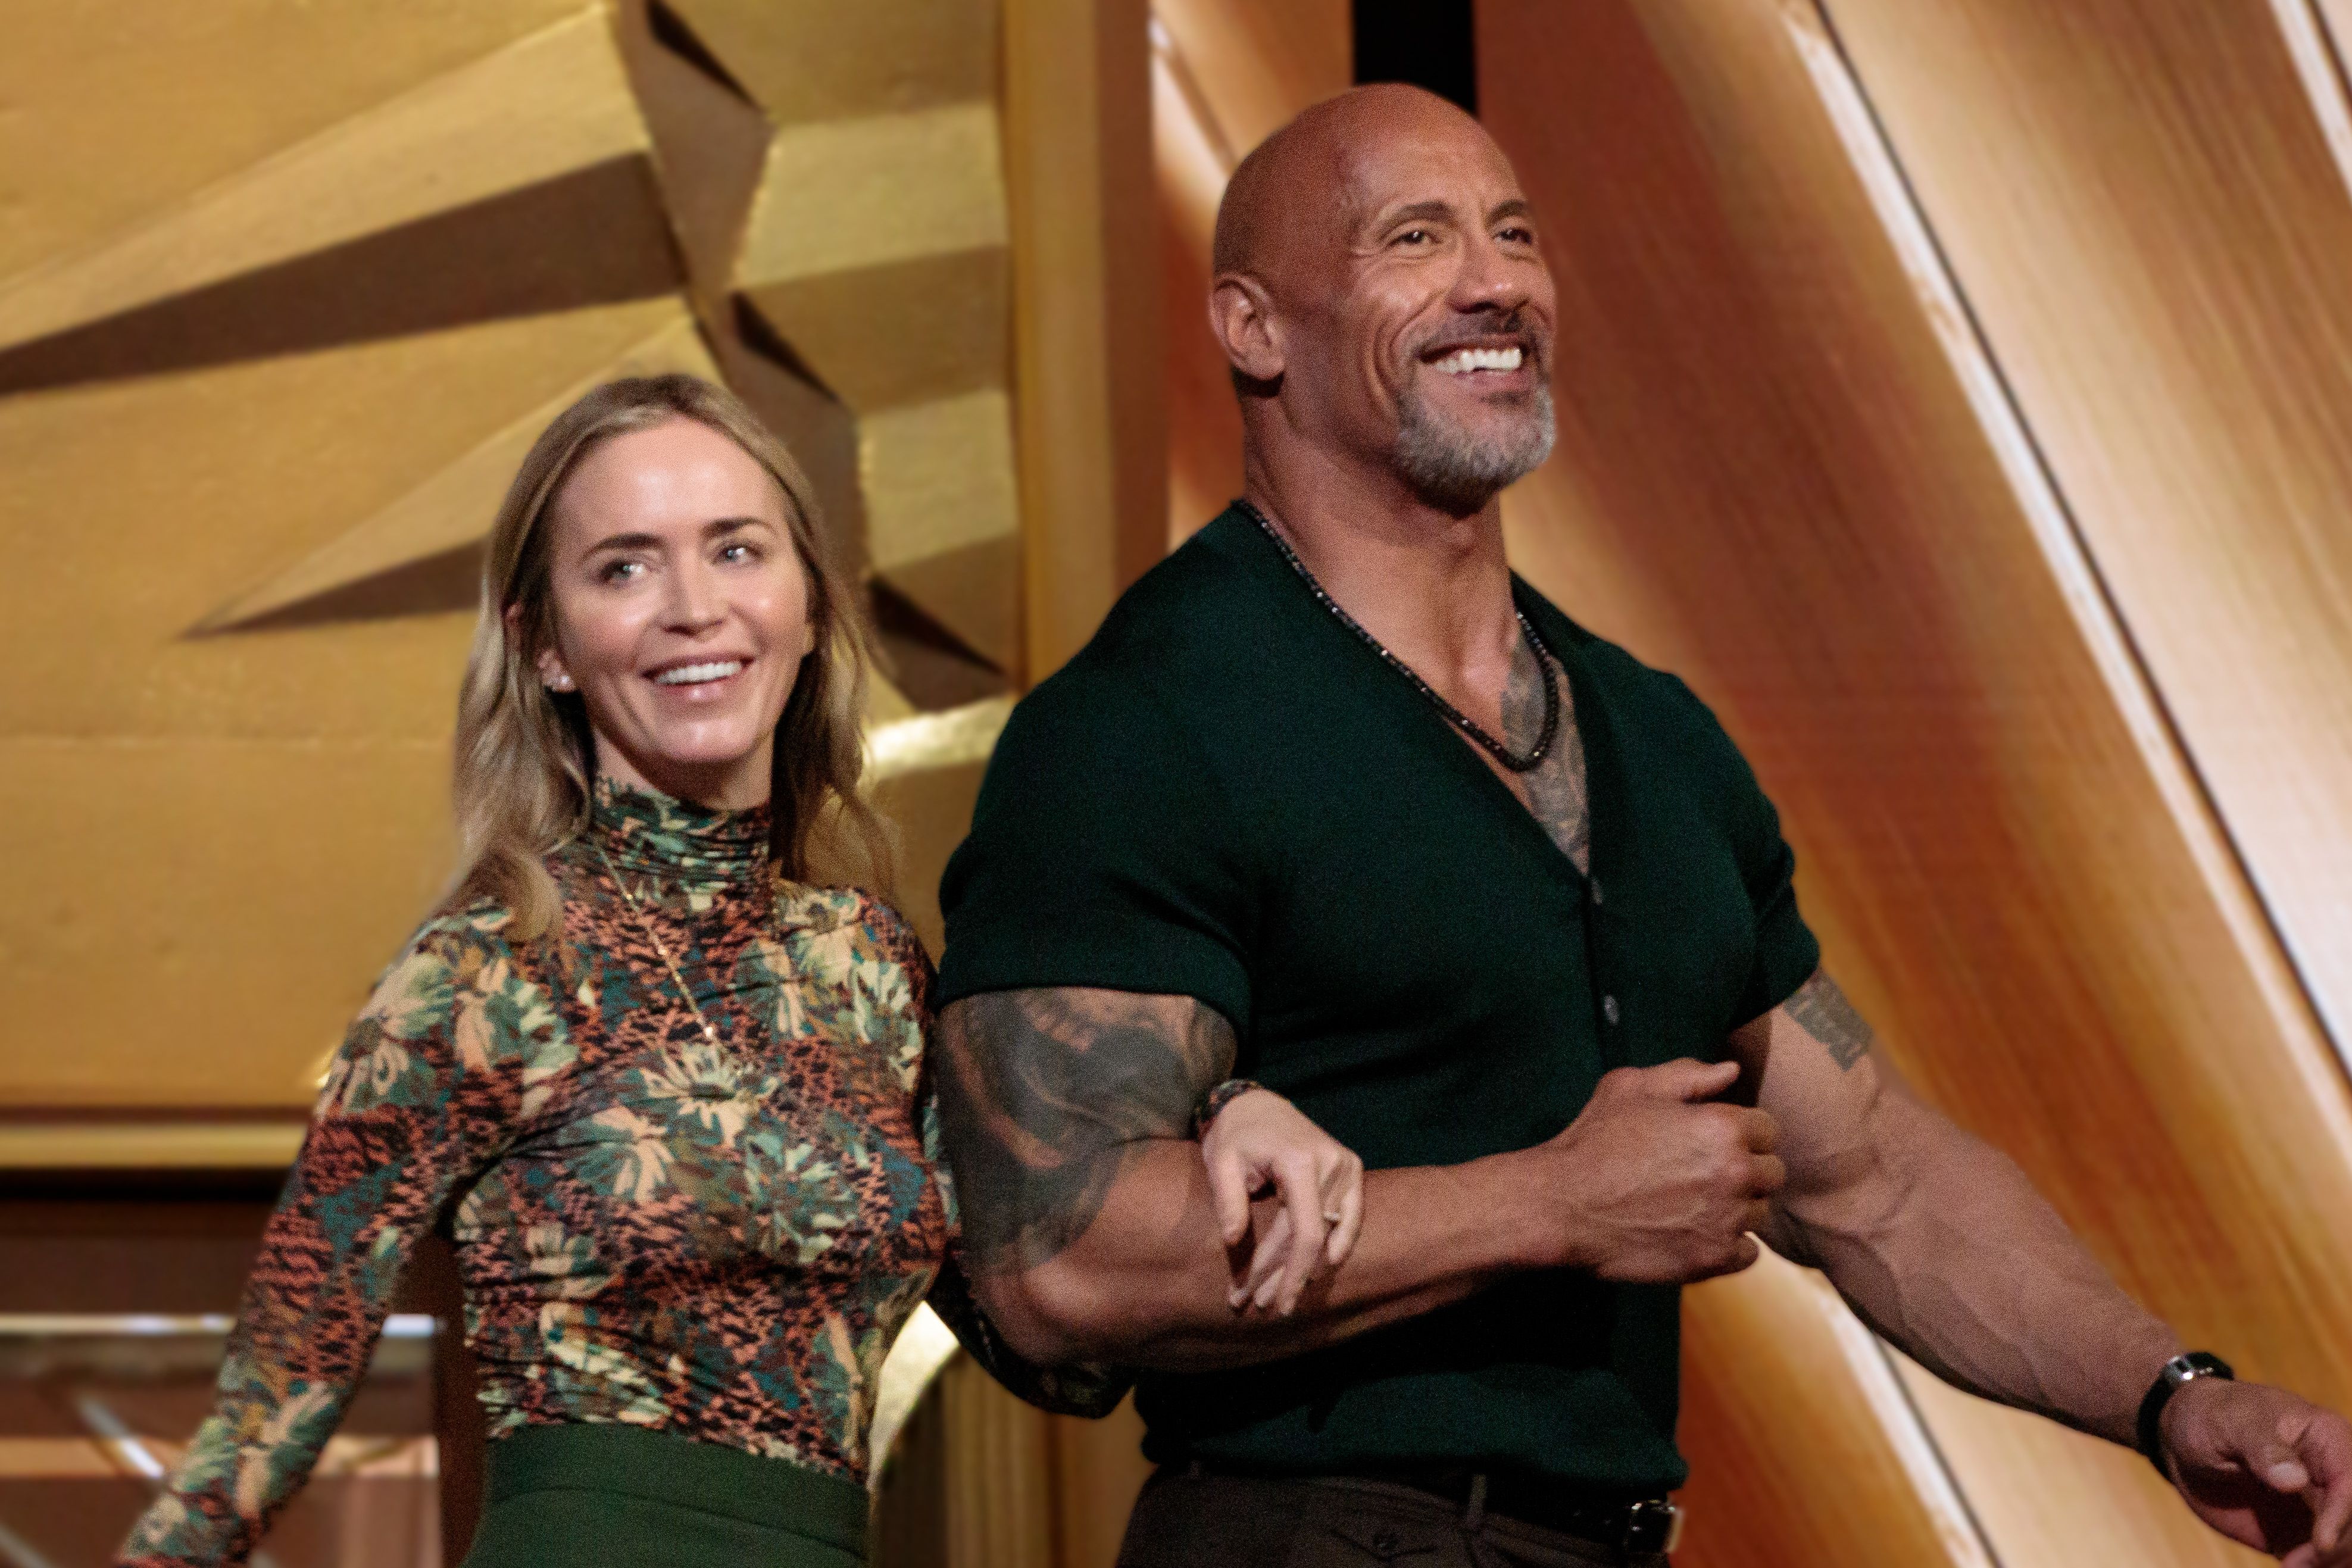 Emily Blunt and Dwayne Johnson at Oscar rehearsals